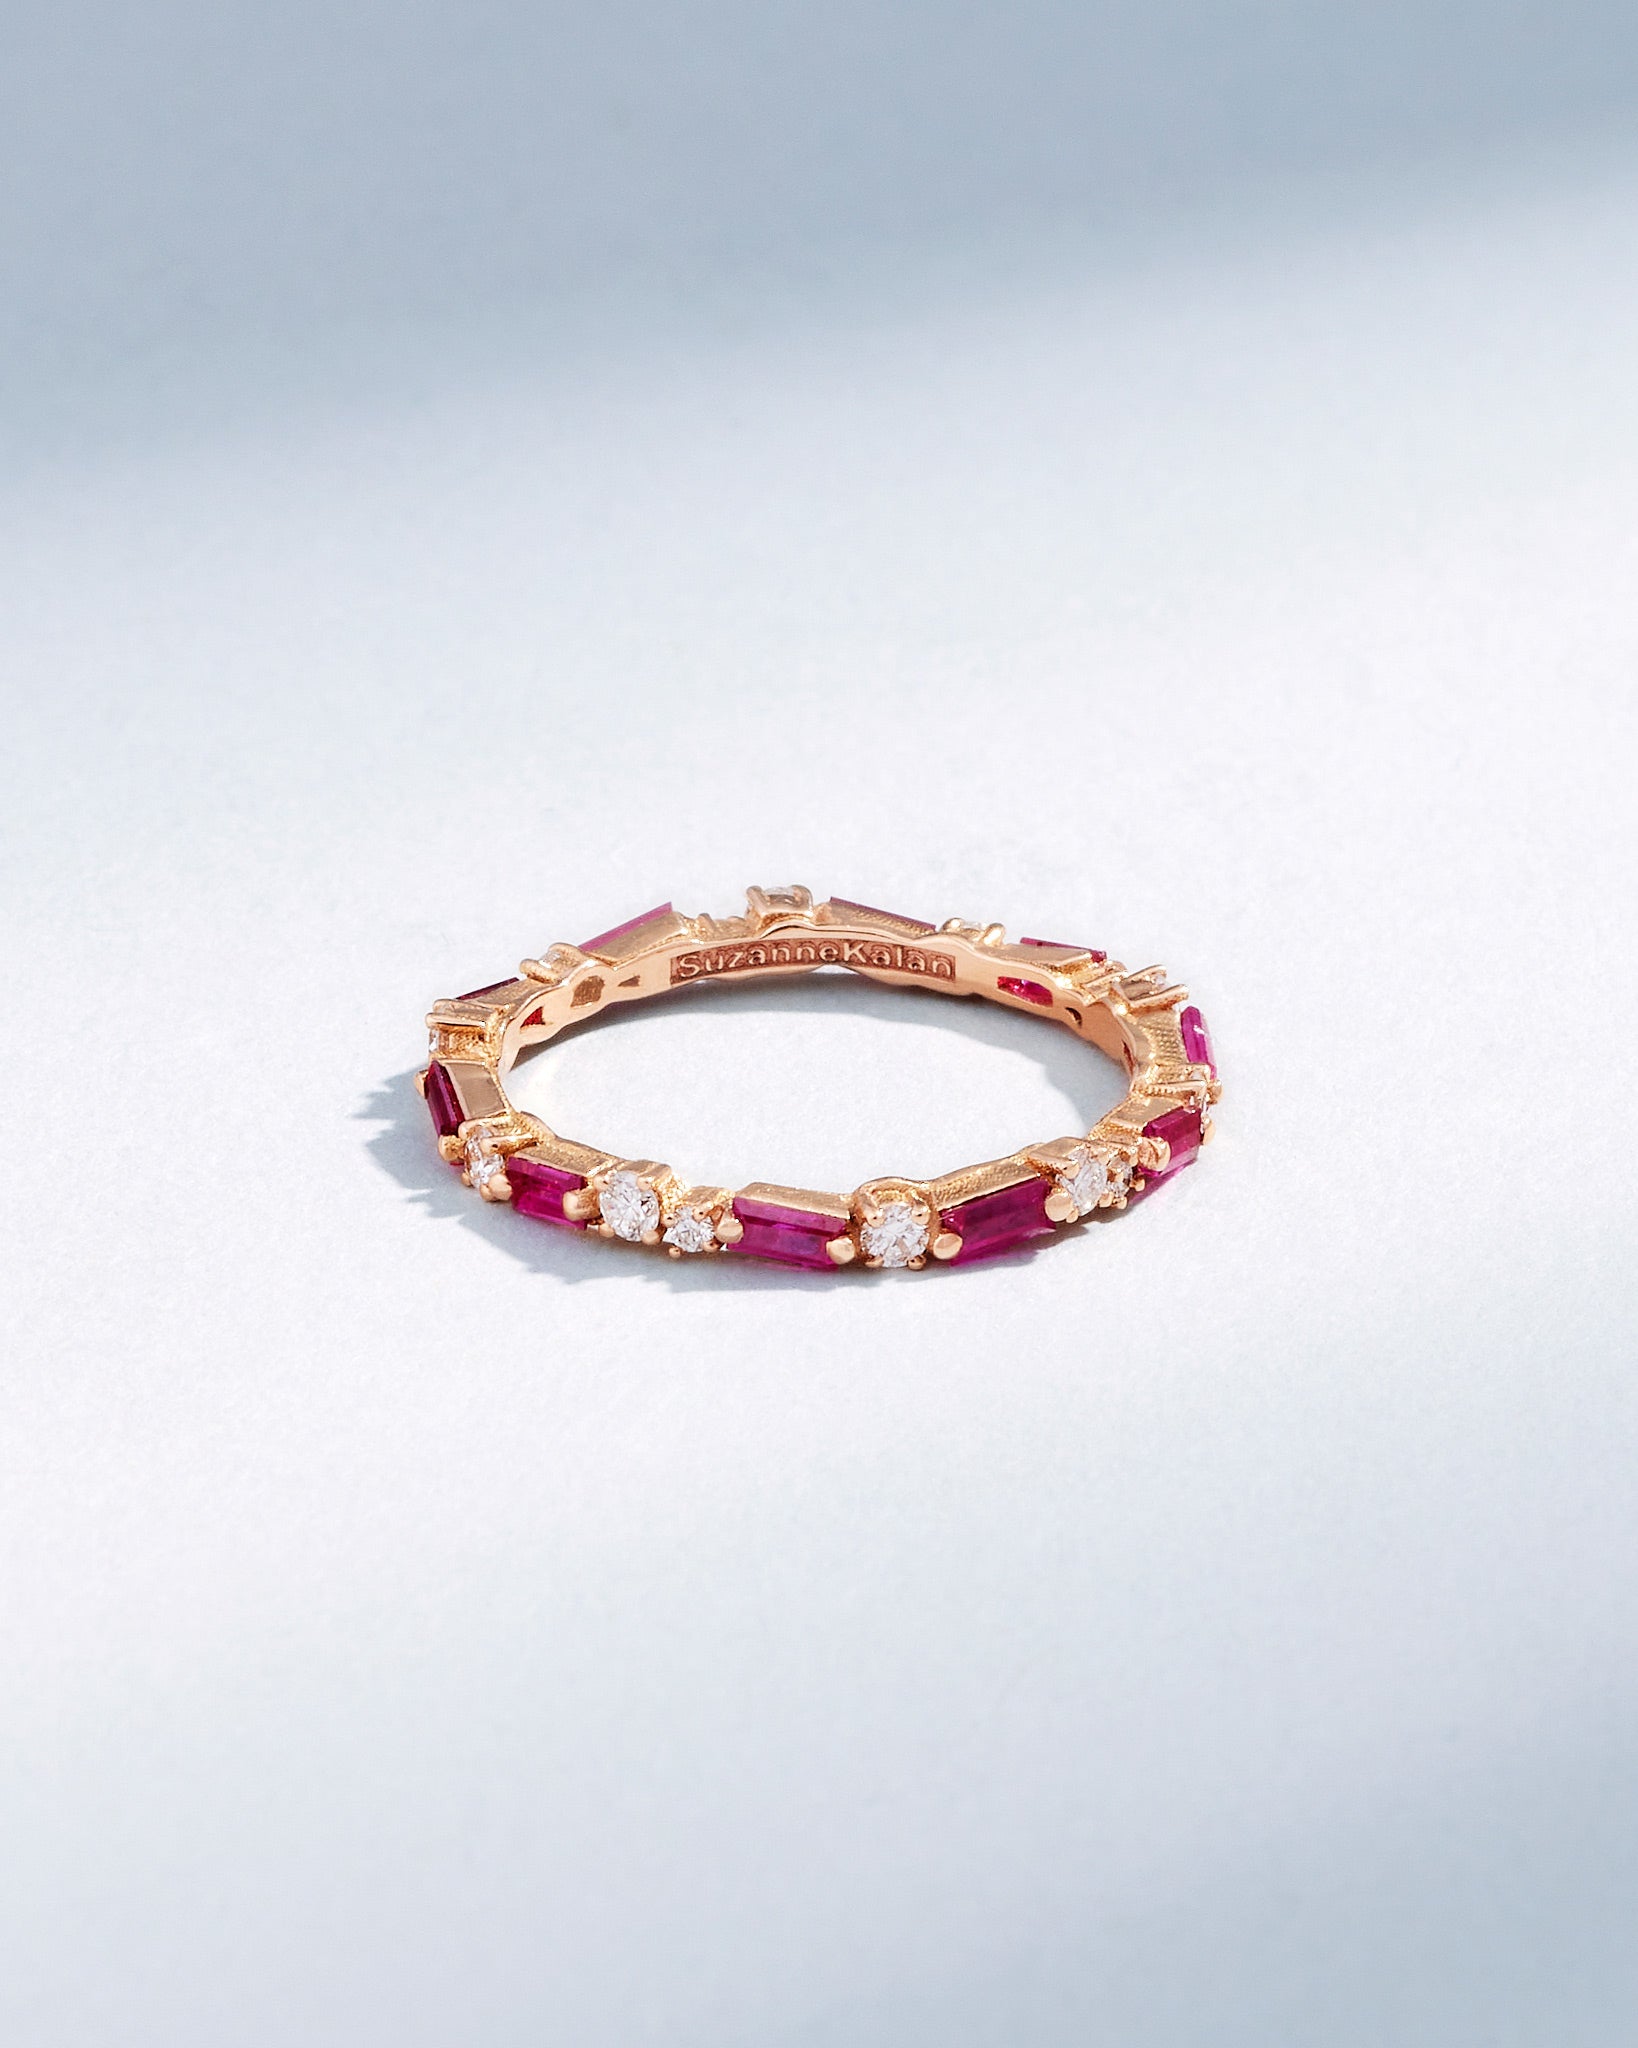 Suzanne Kalan Thin Mix Ruby Eternity Band in 18k rose gold